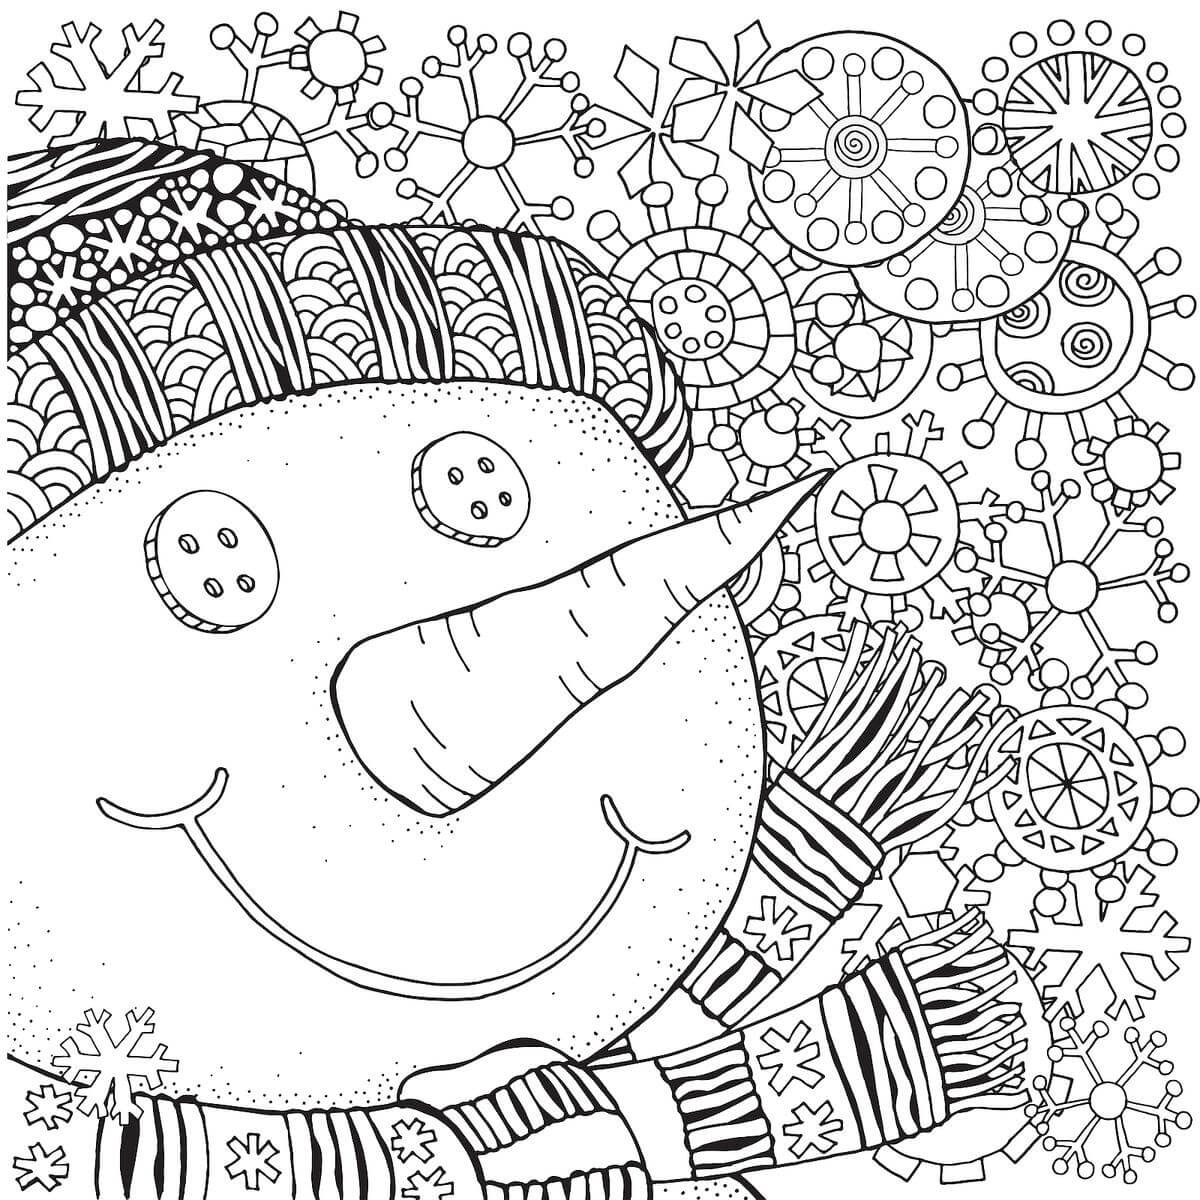 snowman coloring pages for adults | cute snowman coloring pages | simple snowman coloring page